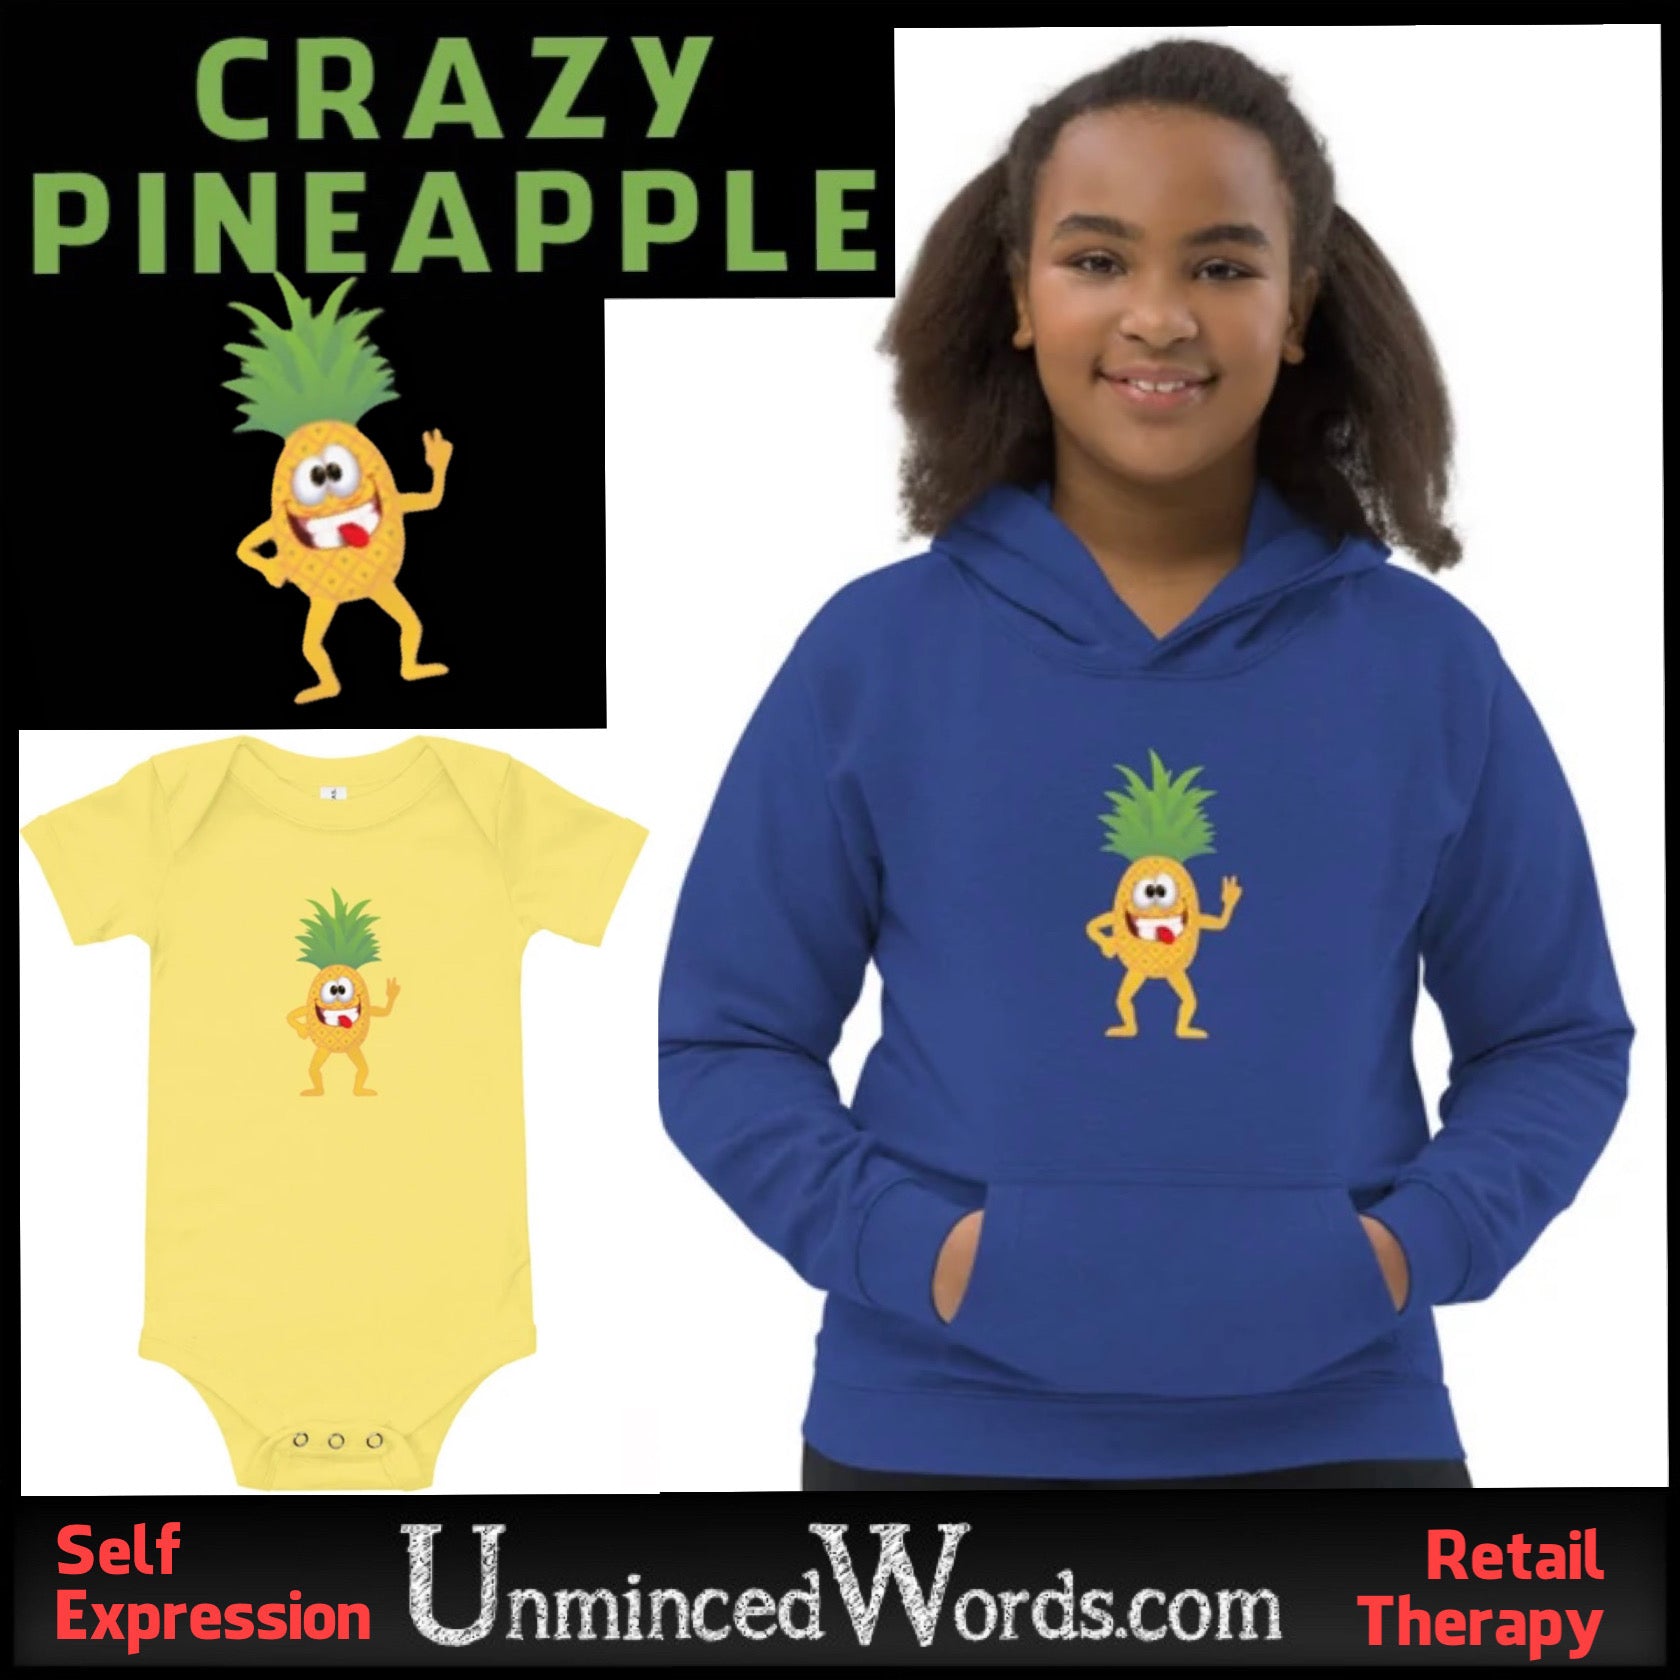 Crazy Pineapple is your kid’s favorite shirt